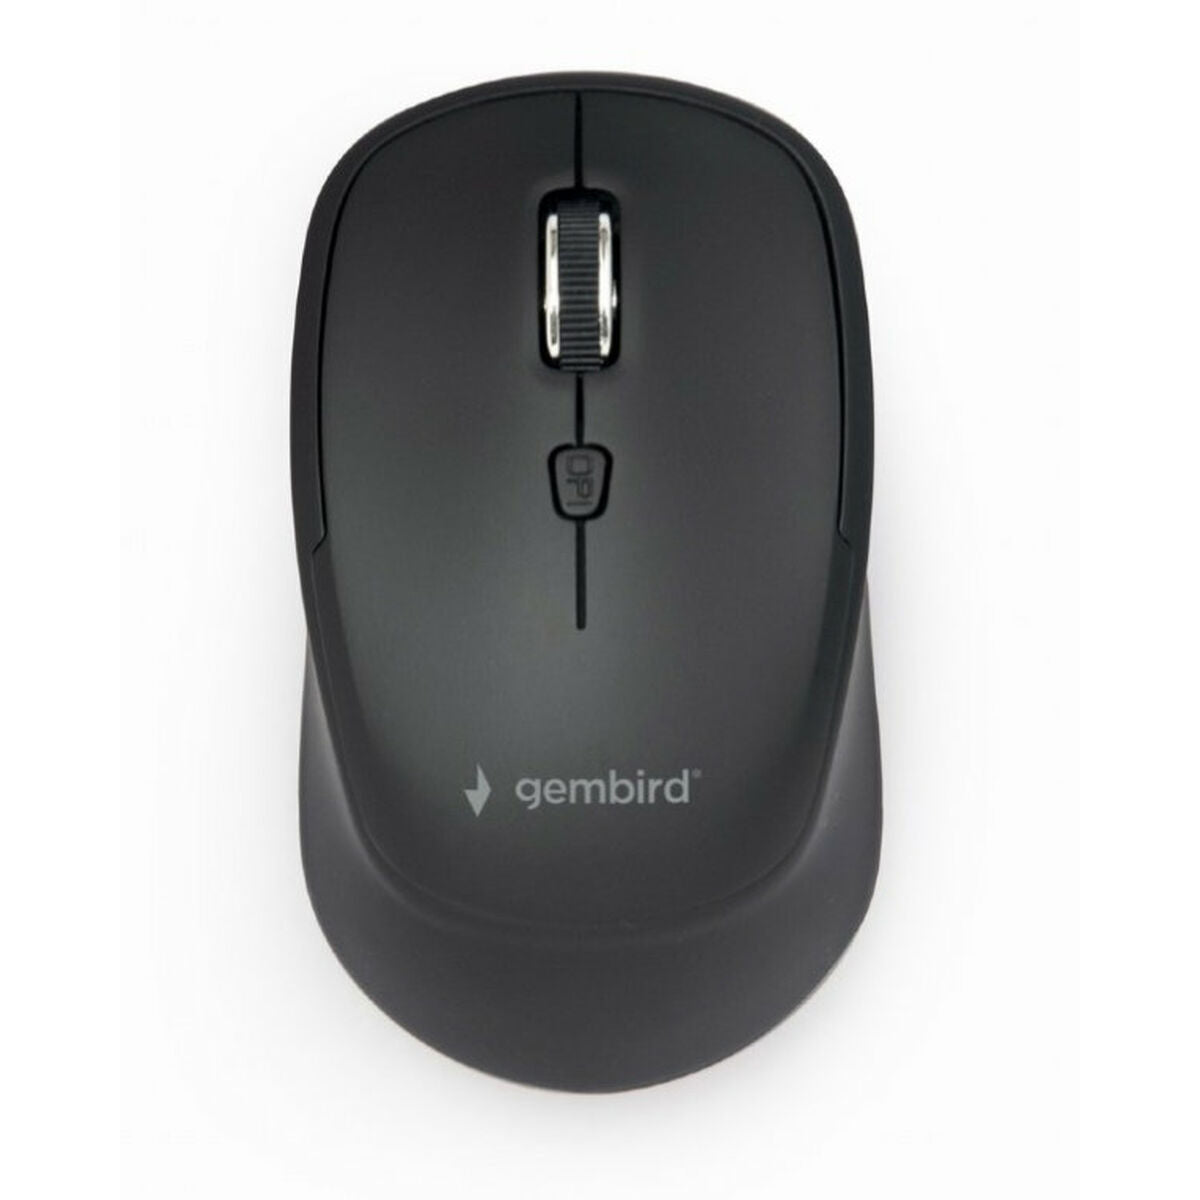 Optical Wireless Mouse GEMBIRD 1600 dpi, GEMBIRD, Computing, Accessories, optical-wireless-mouse-gembird-1600-dpi-1, Brand_GEMBIRD, category-reference-2609, category-reference-2642, category-reference-2656, category-reference-t-19685, category-reference-t-19908, category-reference-t-21353, computers / peripherals, Condition_NEW, office, Price_20 - 50, Teleworking, RiotNook